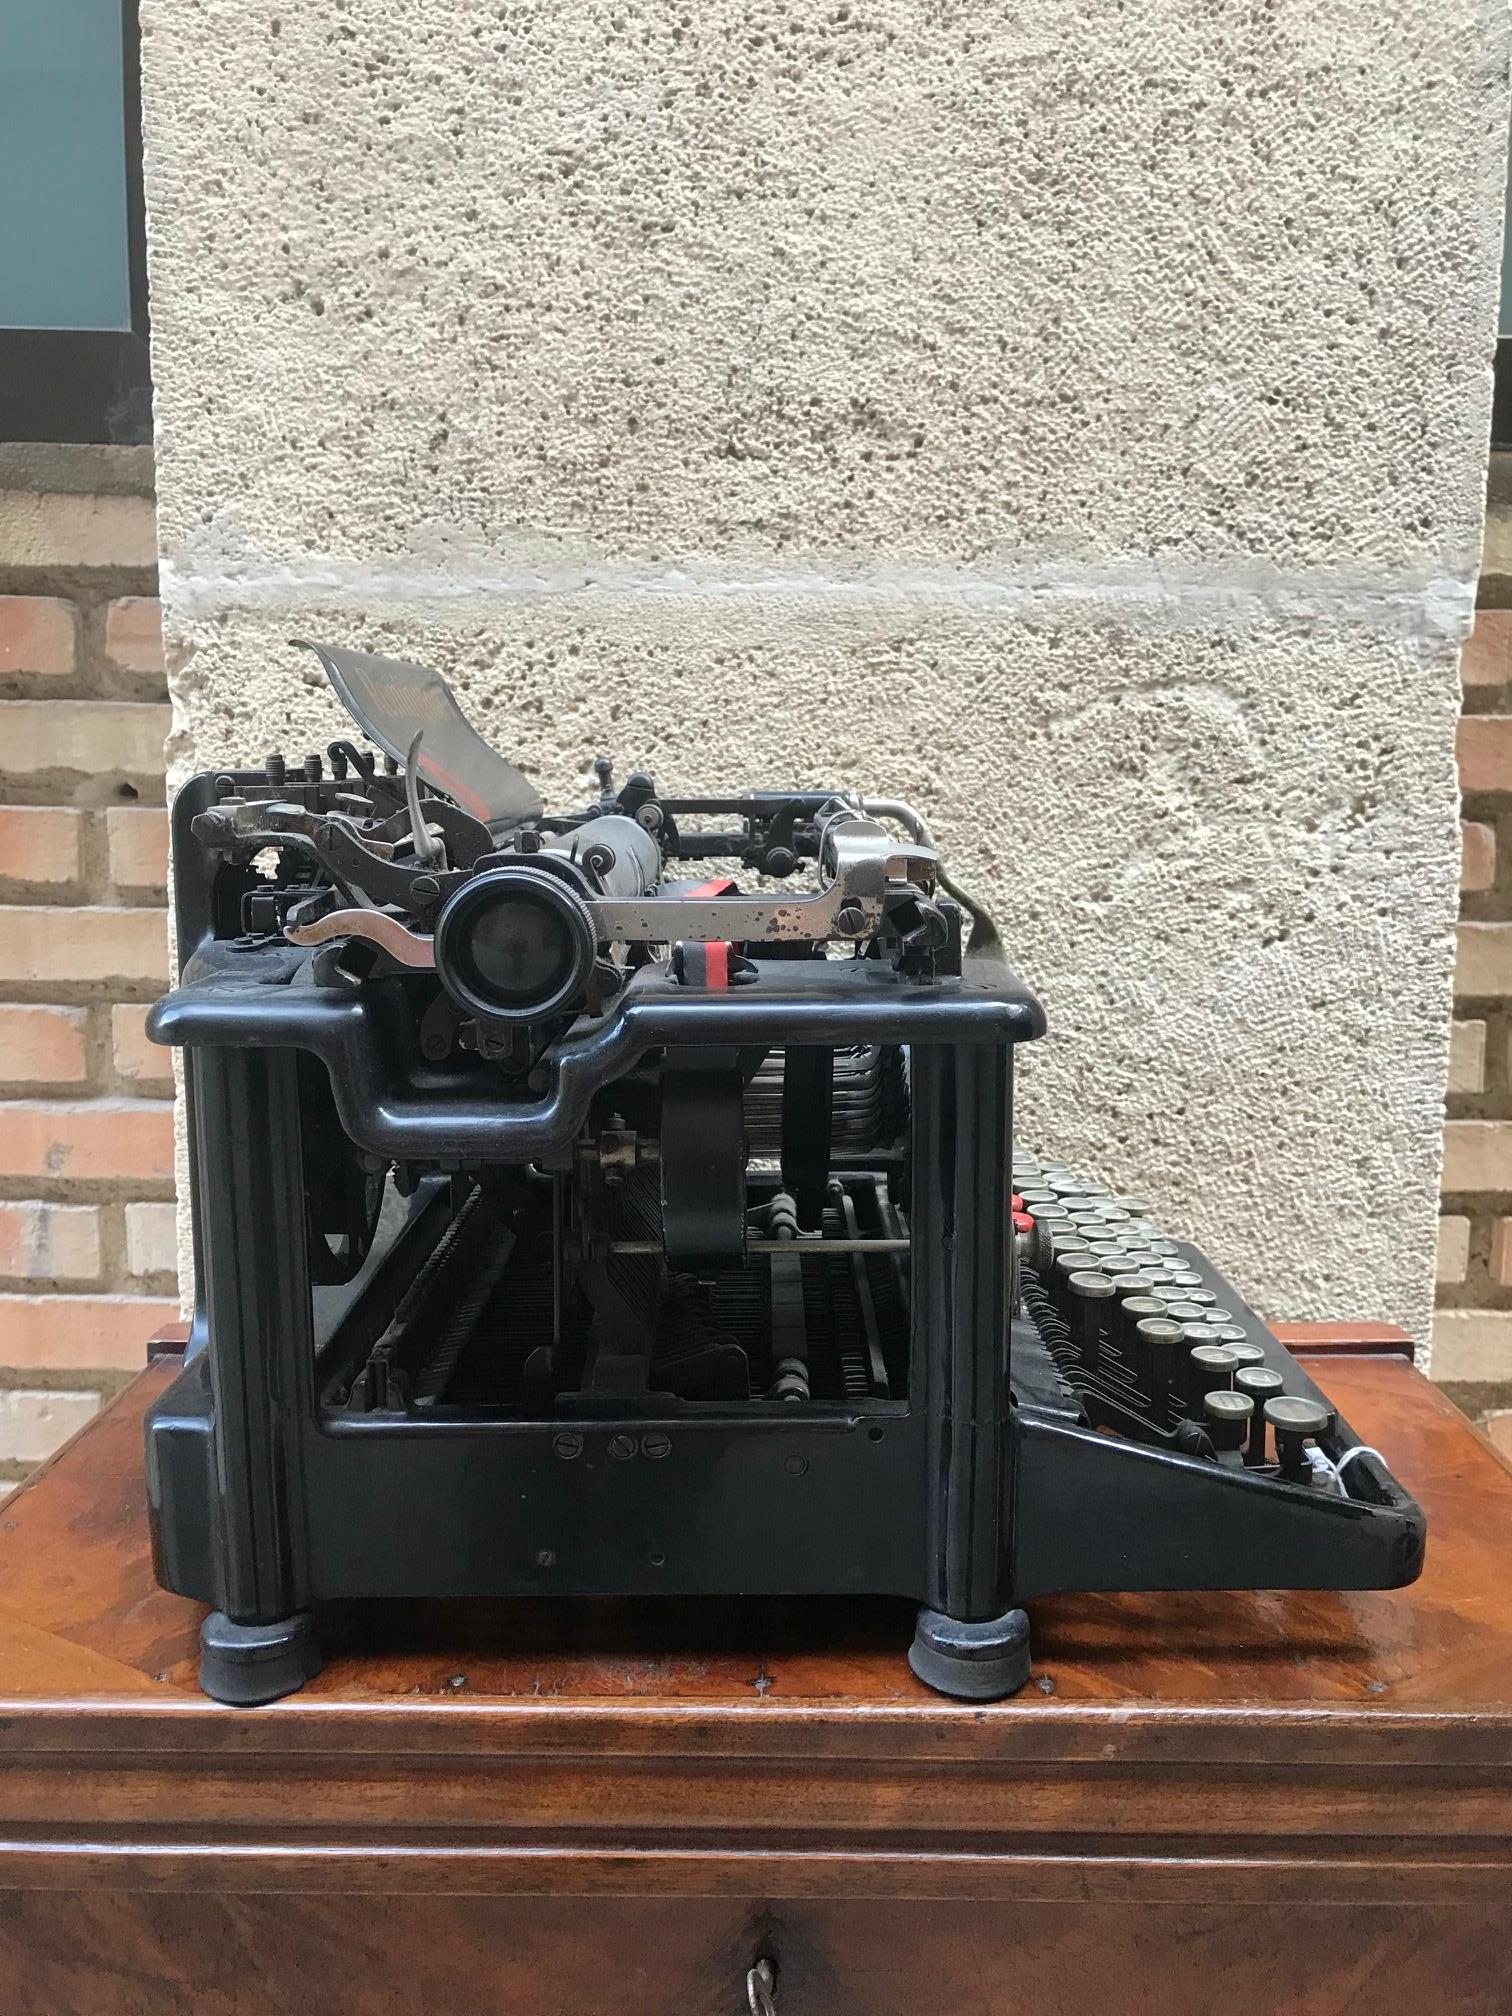 This is a Remington typewriter from New York, from the 1920s.
It is black.

Awesome collection piece.

This is a unique opportunity to buy a highly decorative and personalized collection piece of historical measurements from the early 20th